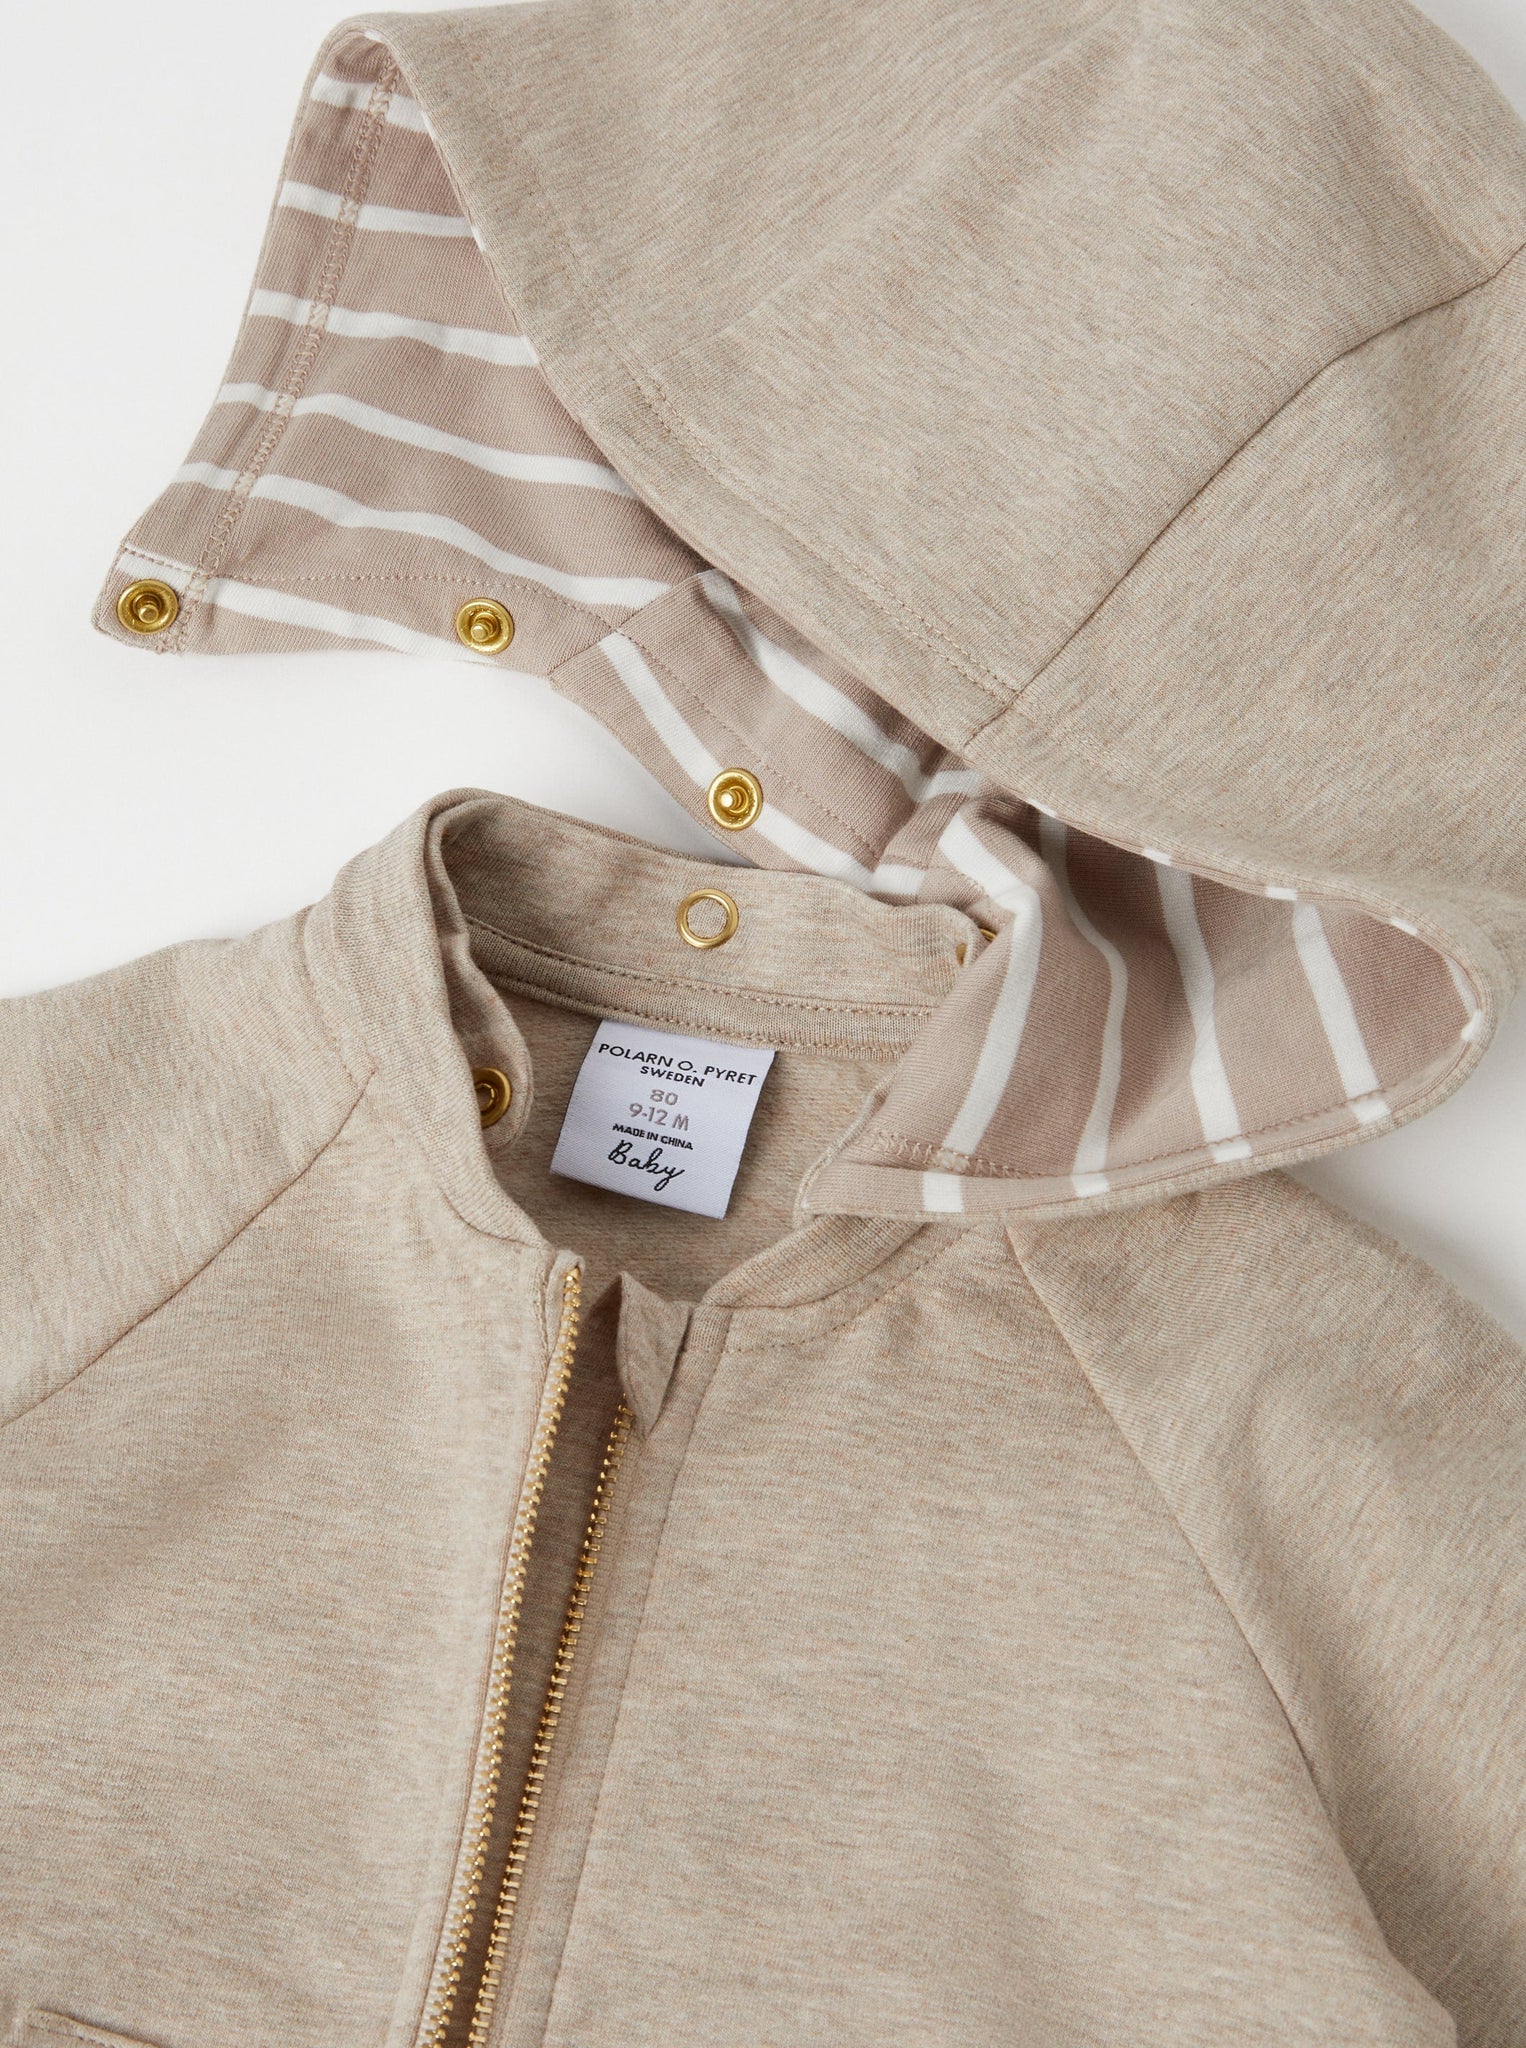 Organic Cotton Beige Baby All-In-One from the Polarn O. Pyret babywear collection. Clothes made using sustainably sourced materials.